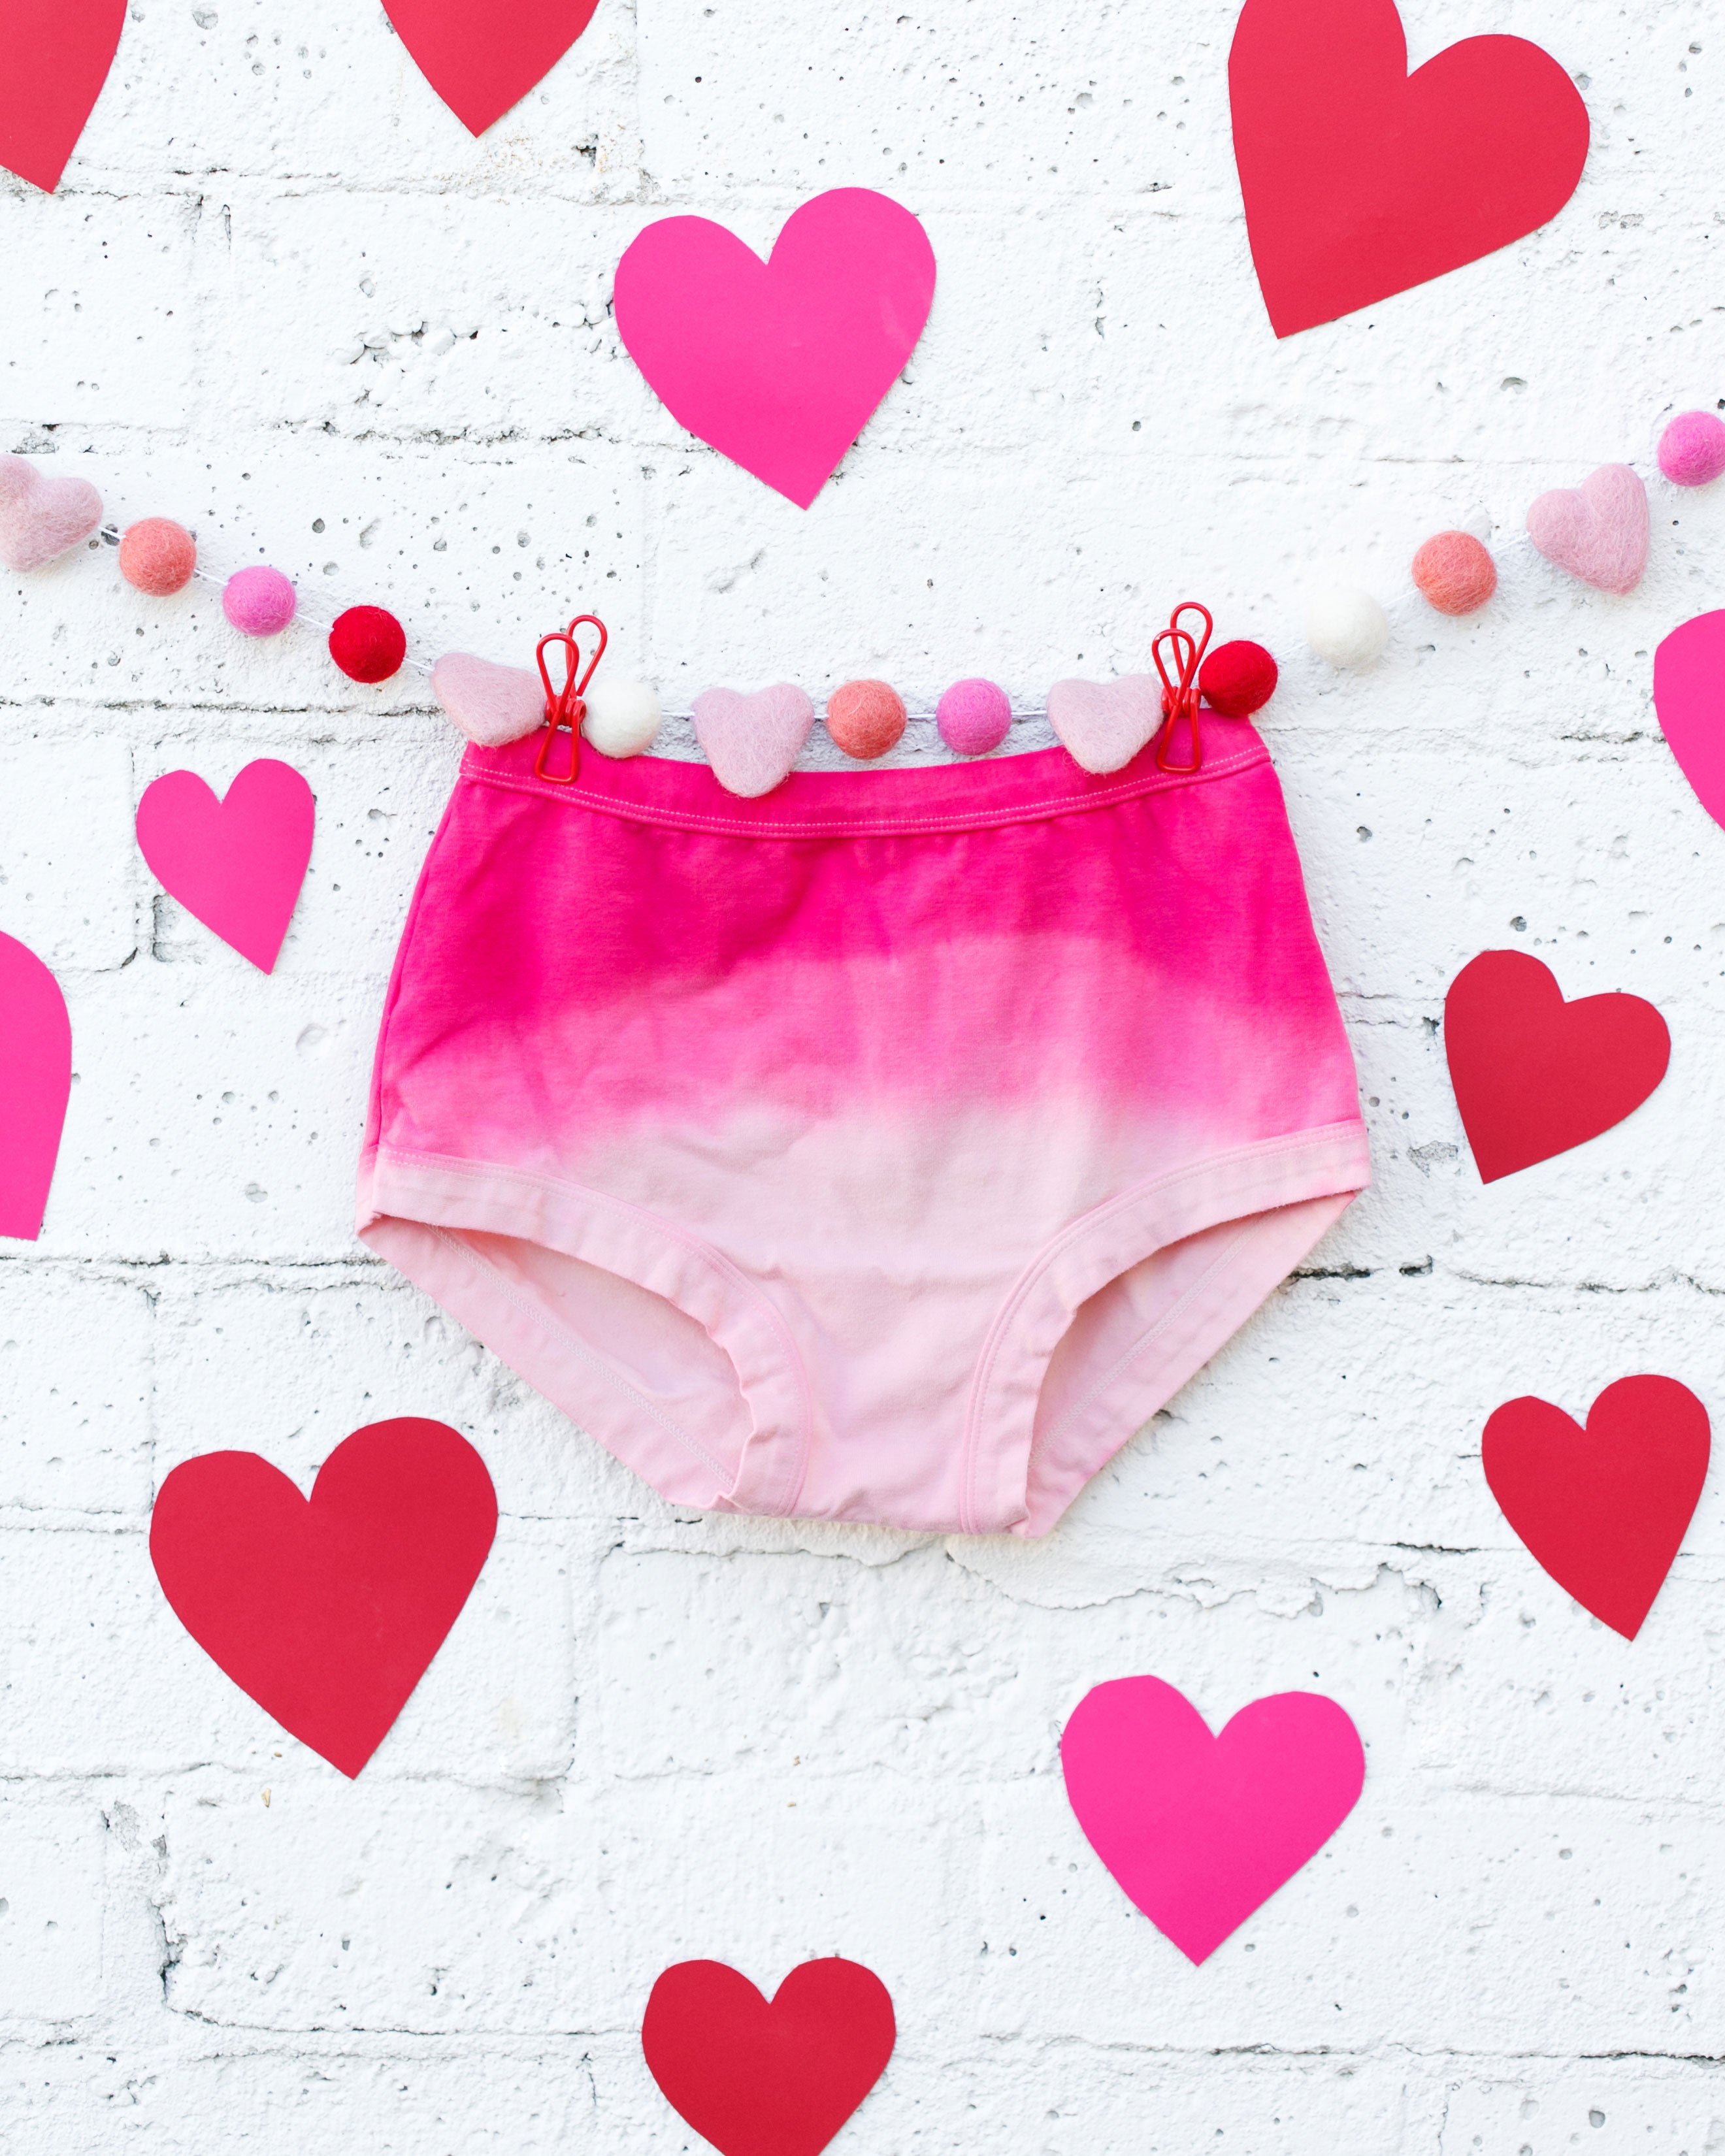 Photo of Thunderpants organic cotton Original underwear in Valentine's Day Dip Dye ombre pinks with hearts around.